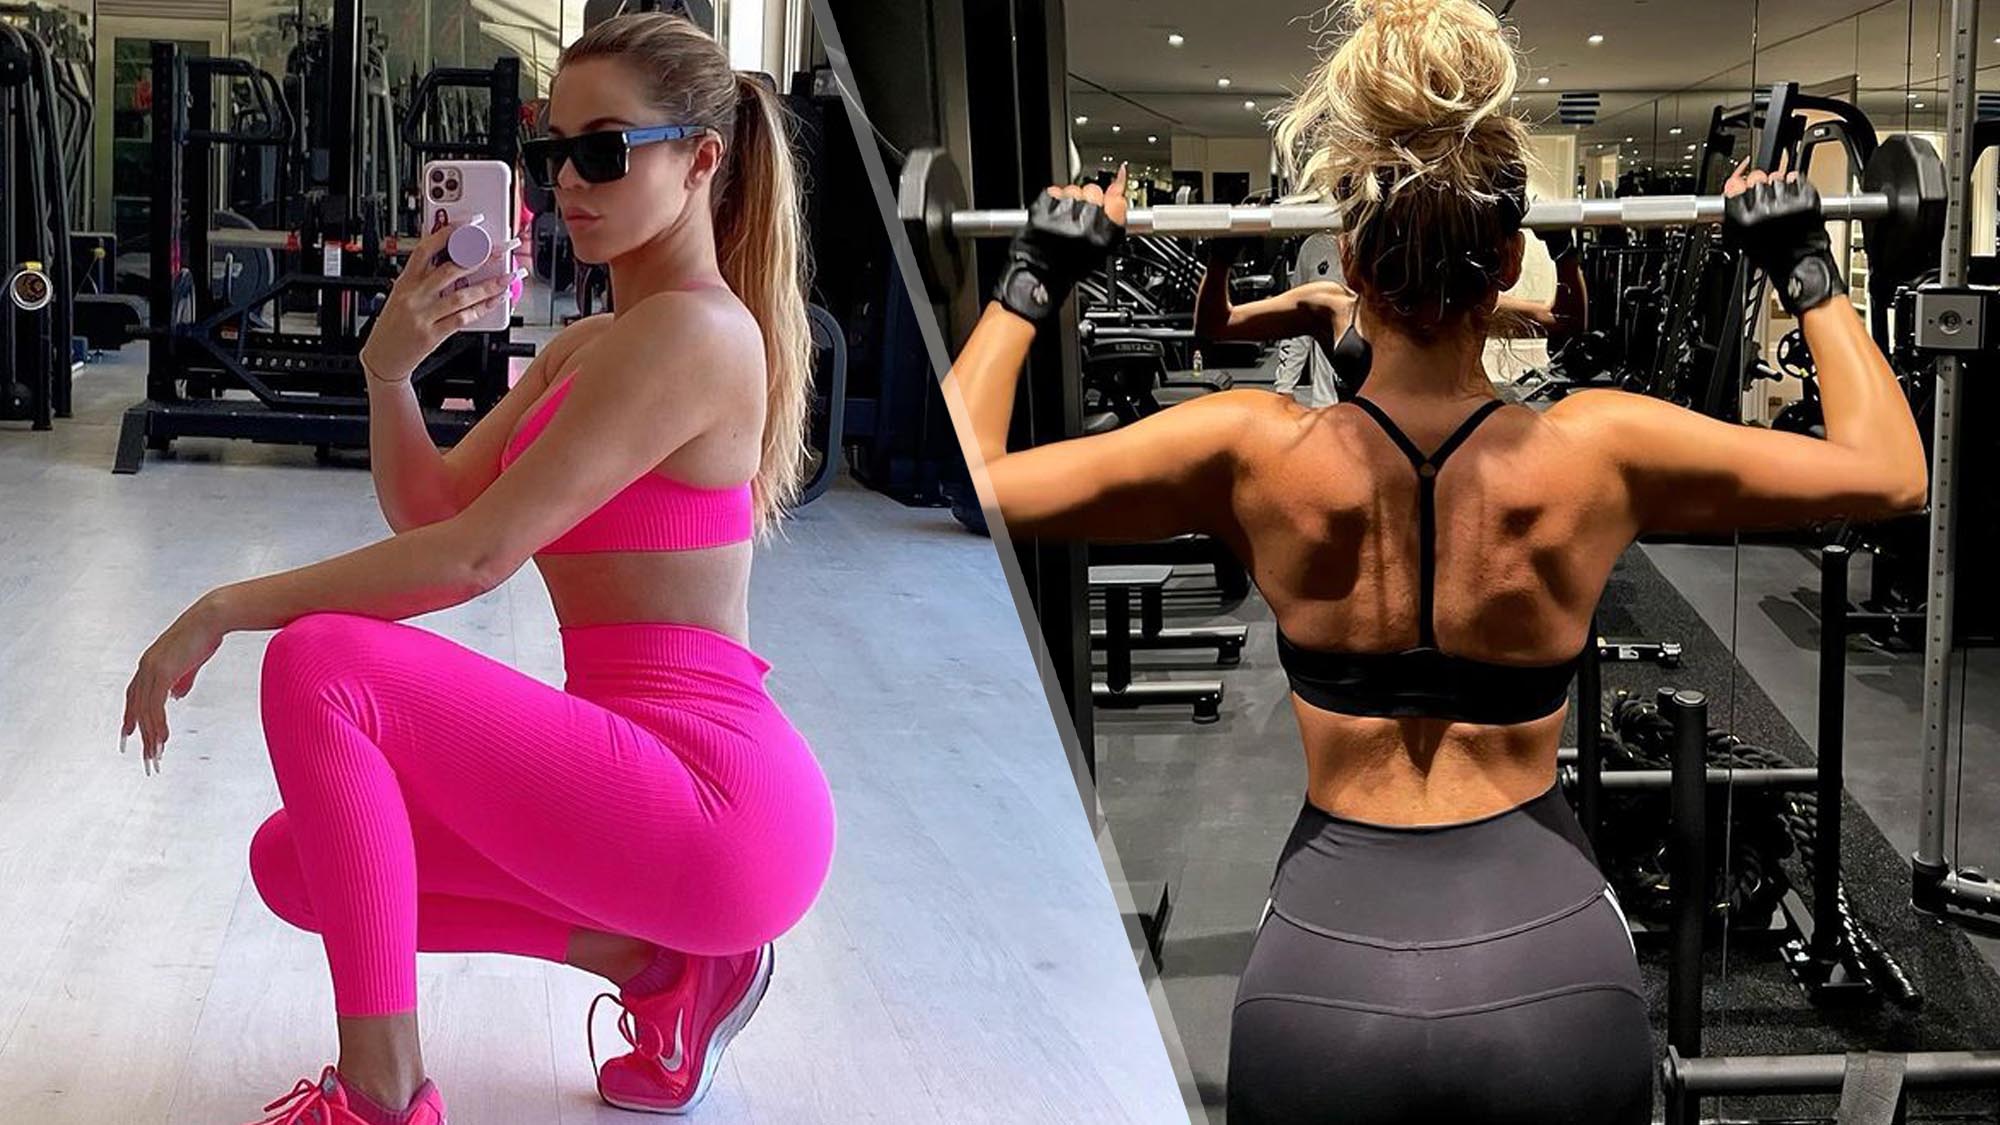 I just tried Khloe Kardashian's workout — and it's intense